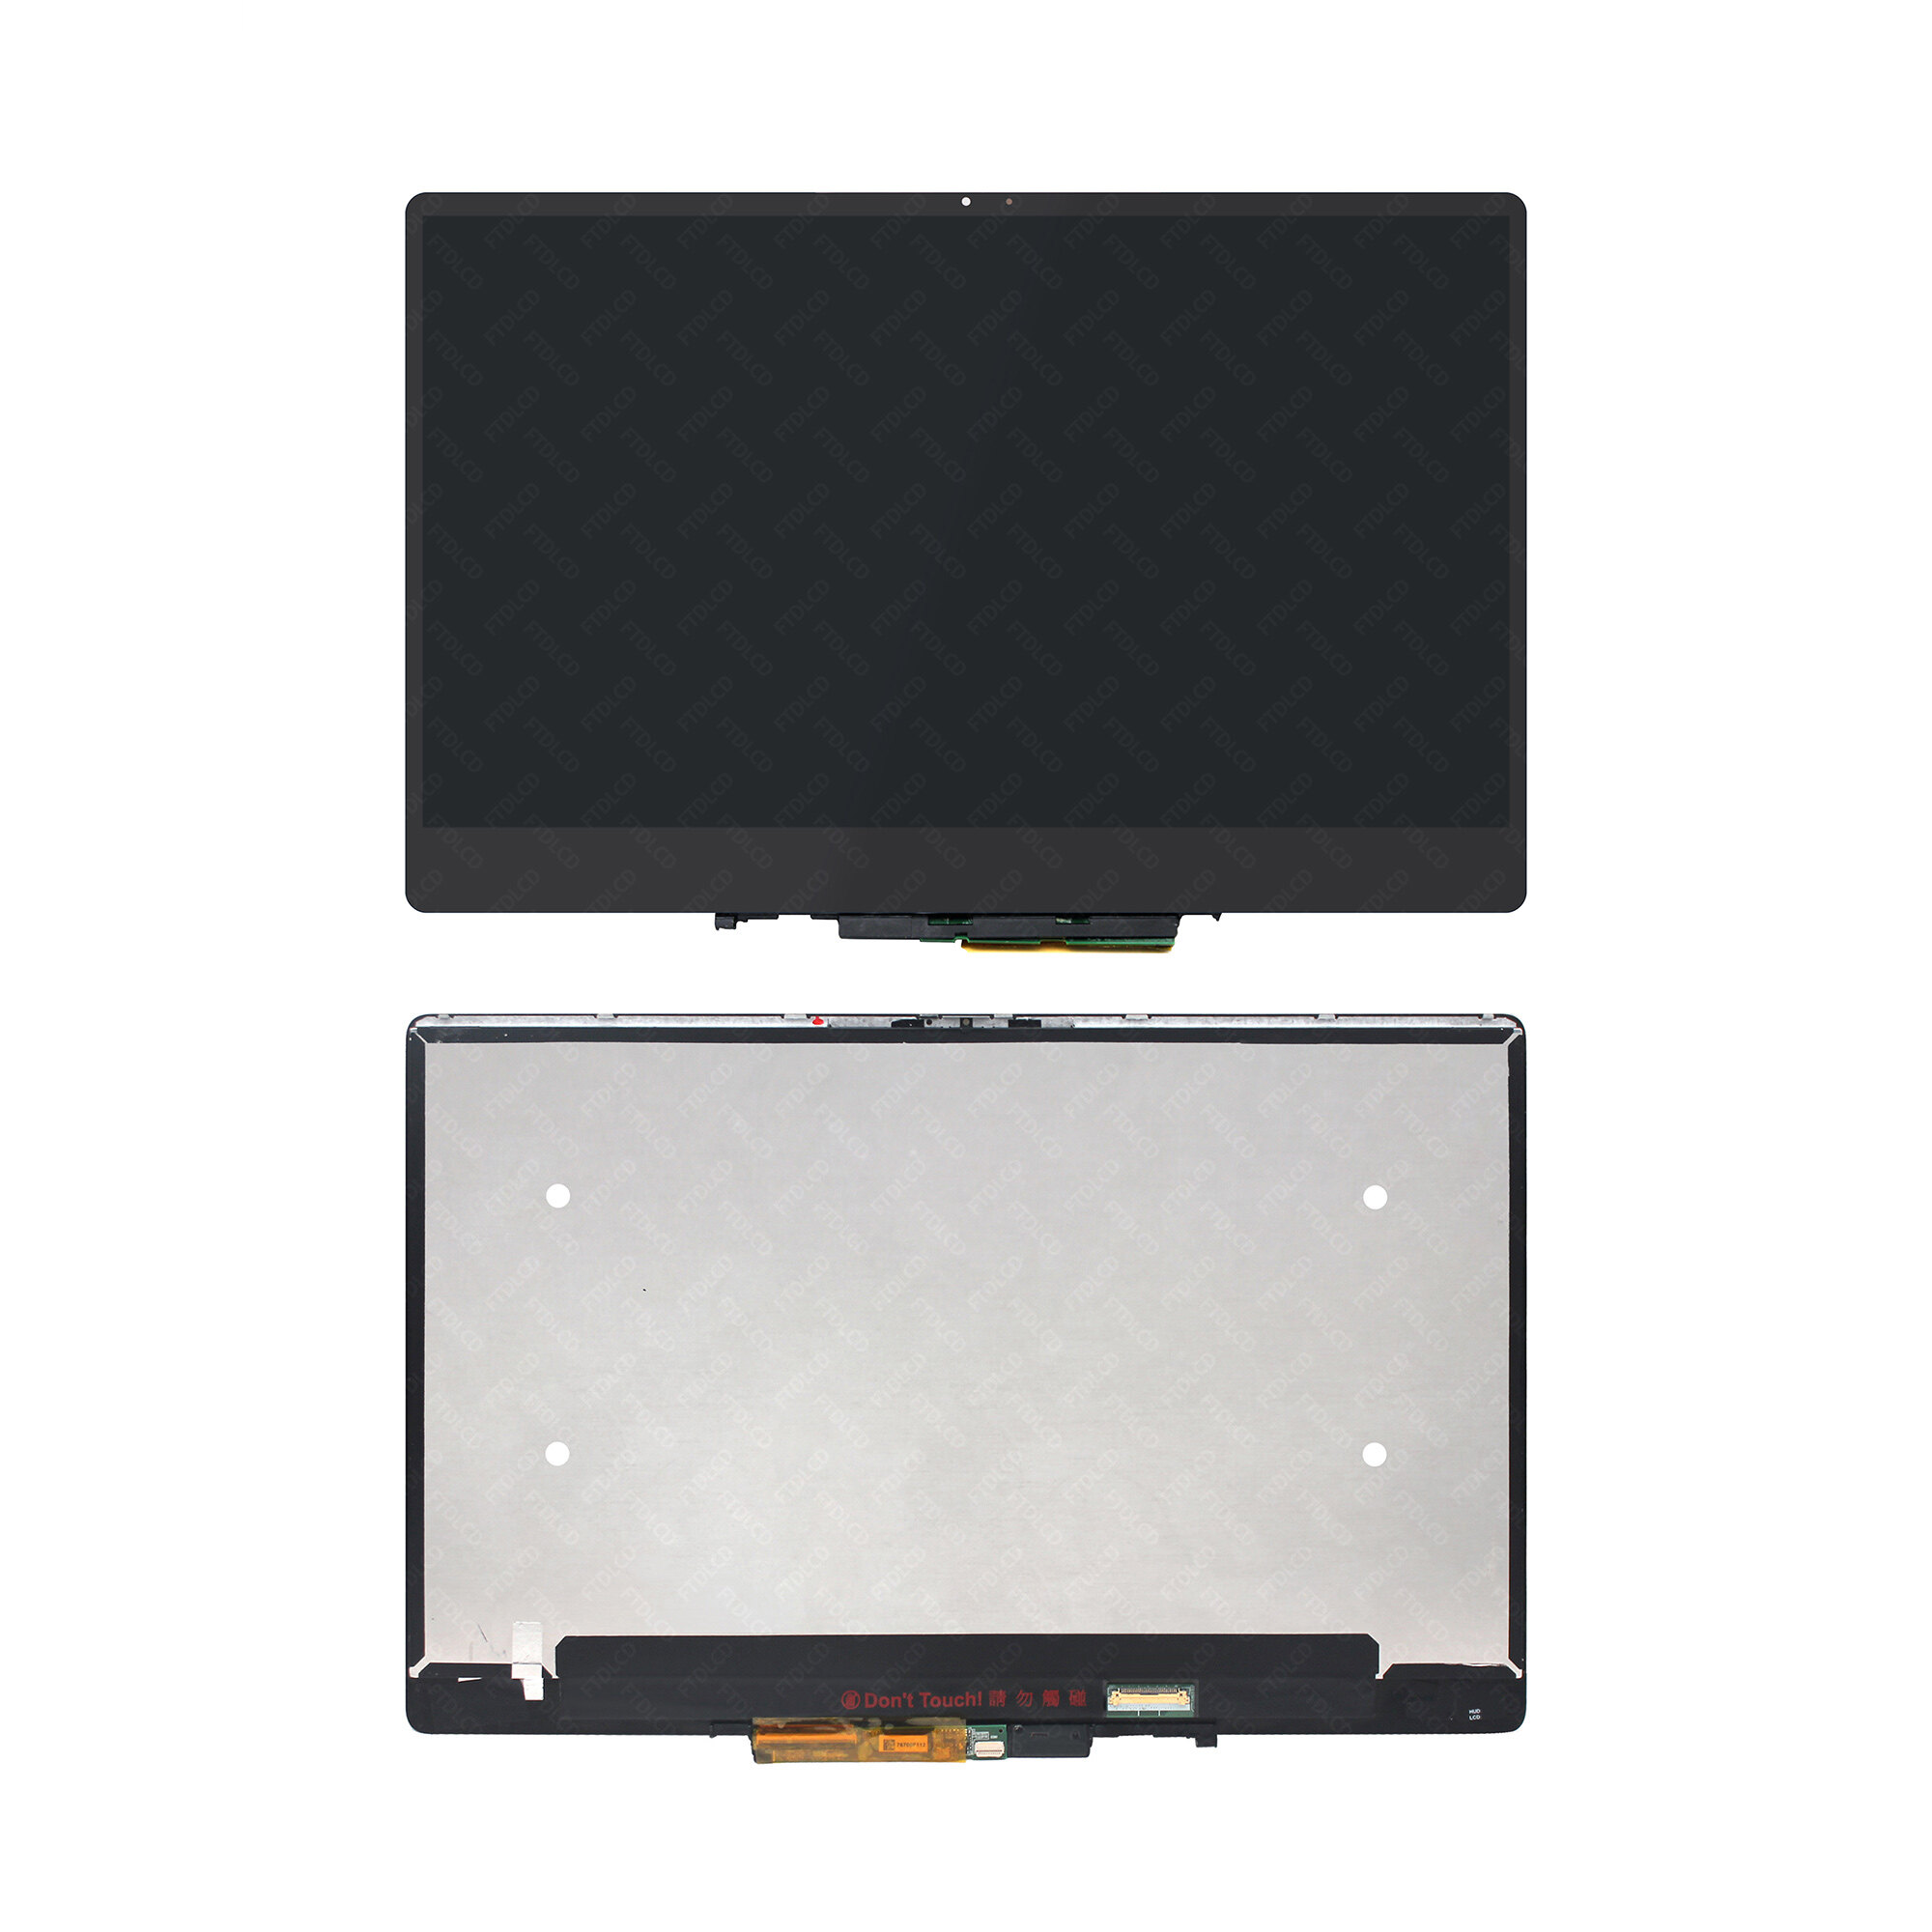 Kreplacement FHD LCD Display Touch Screen Assembly for Dell Inspiron 13 7000 P91G P91G001